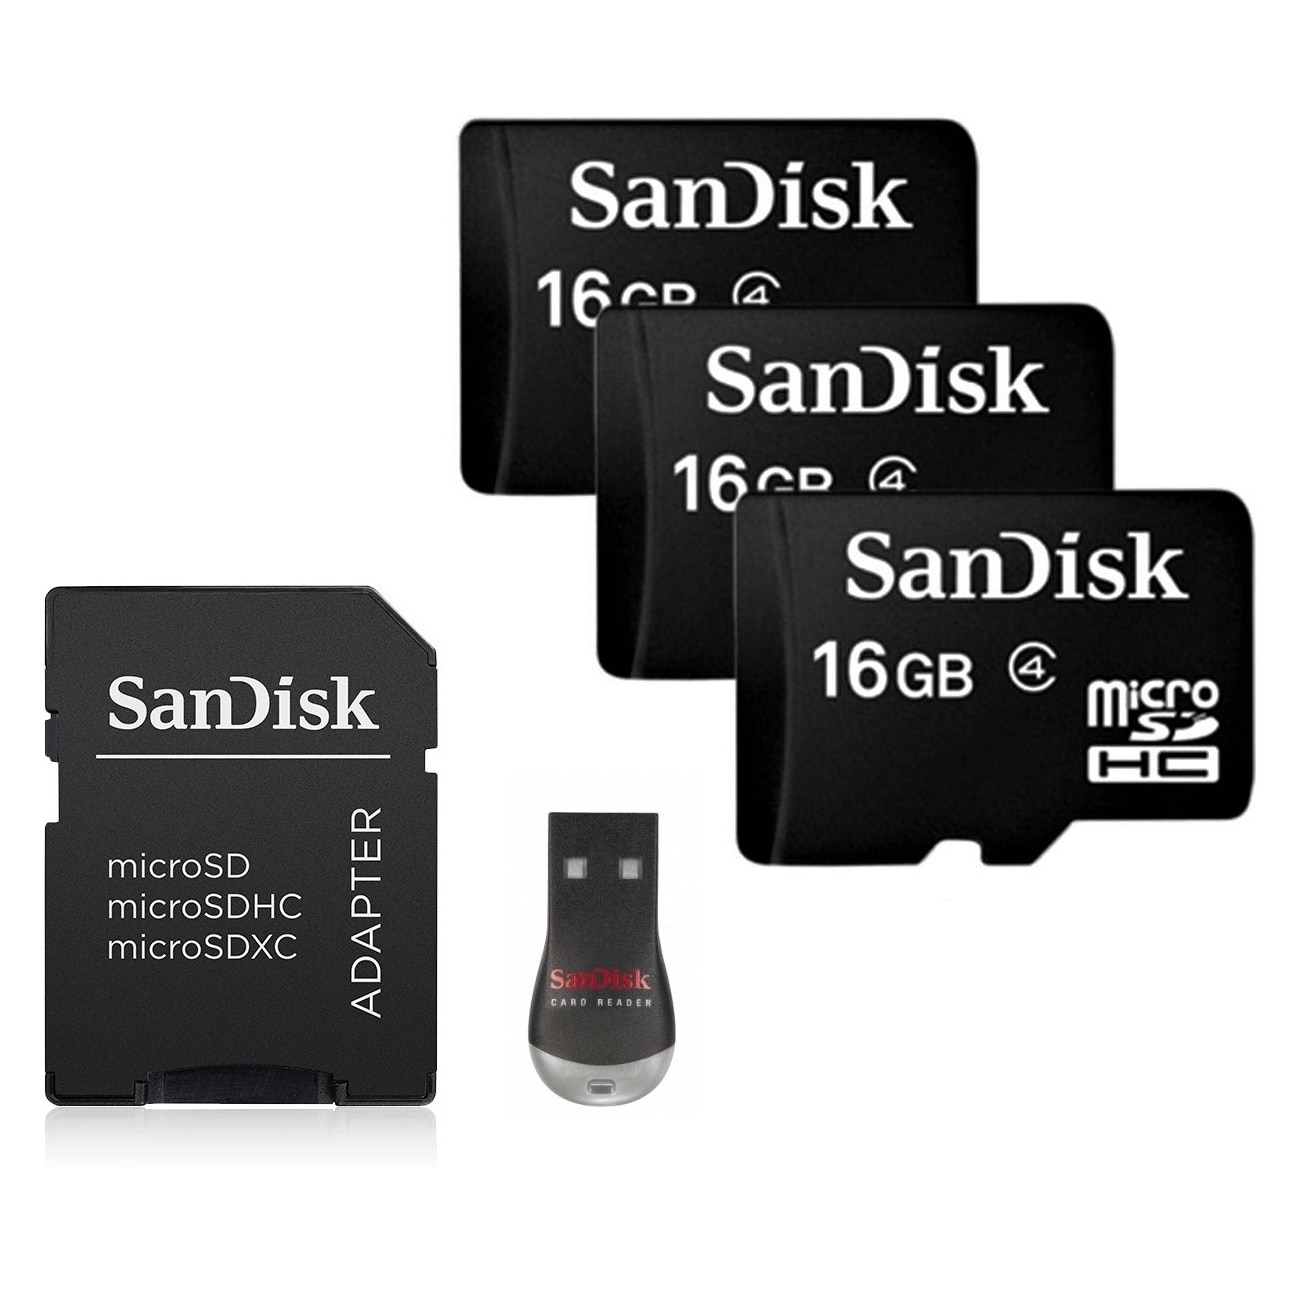 3 Pack - SanDisk 16GB Micro SD Card with SD Adapte...